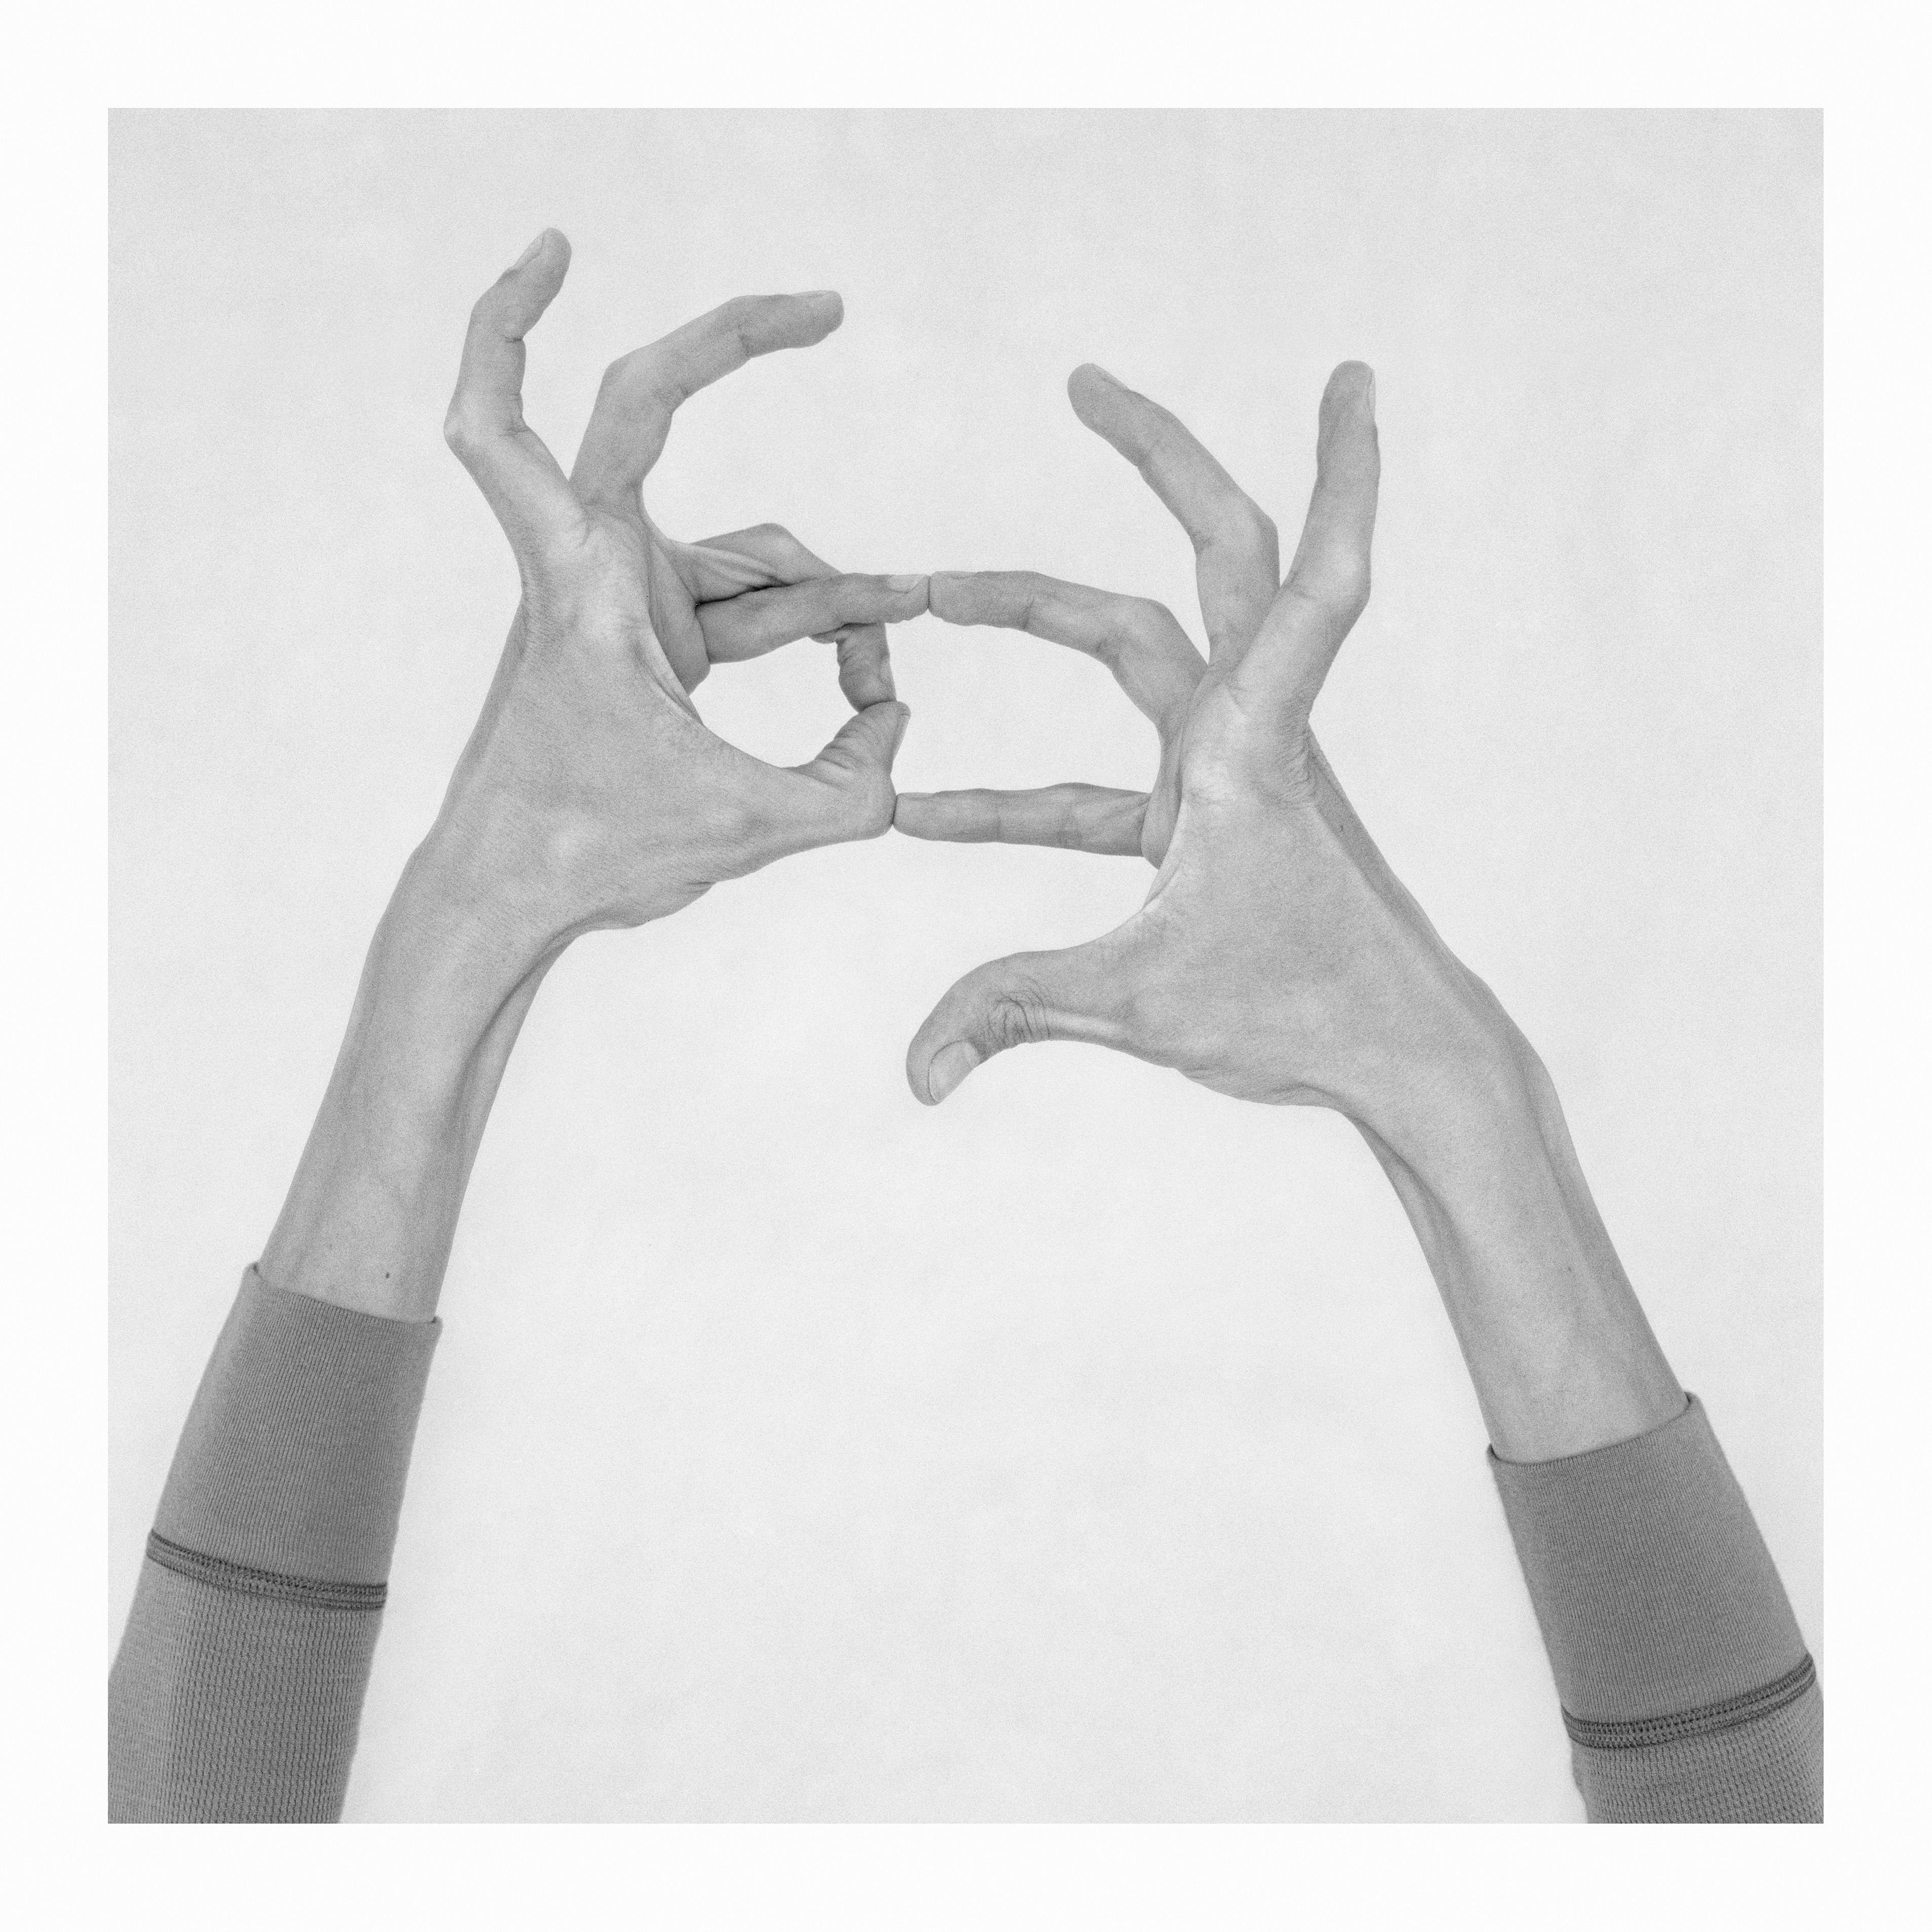 Untitled XI. From the Series Chiromorphose. Hands. Black & White Photography